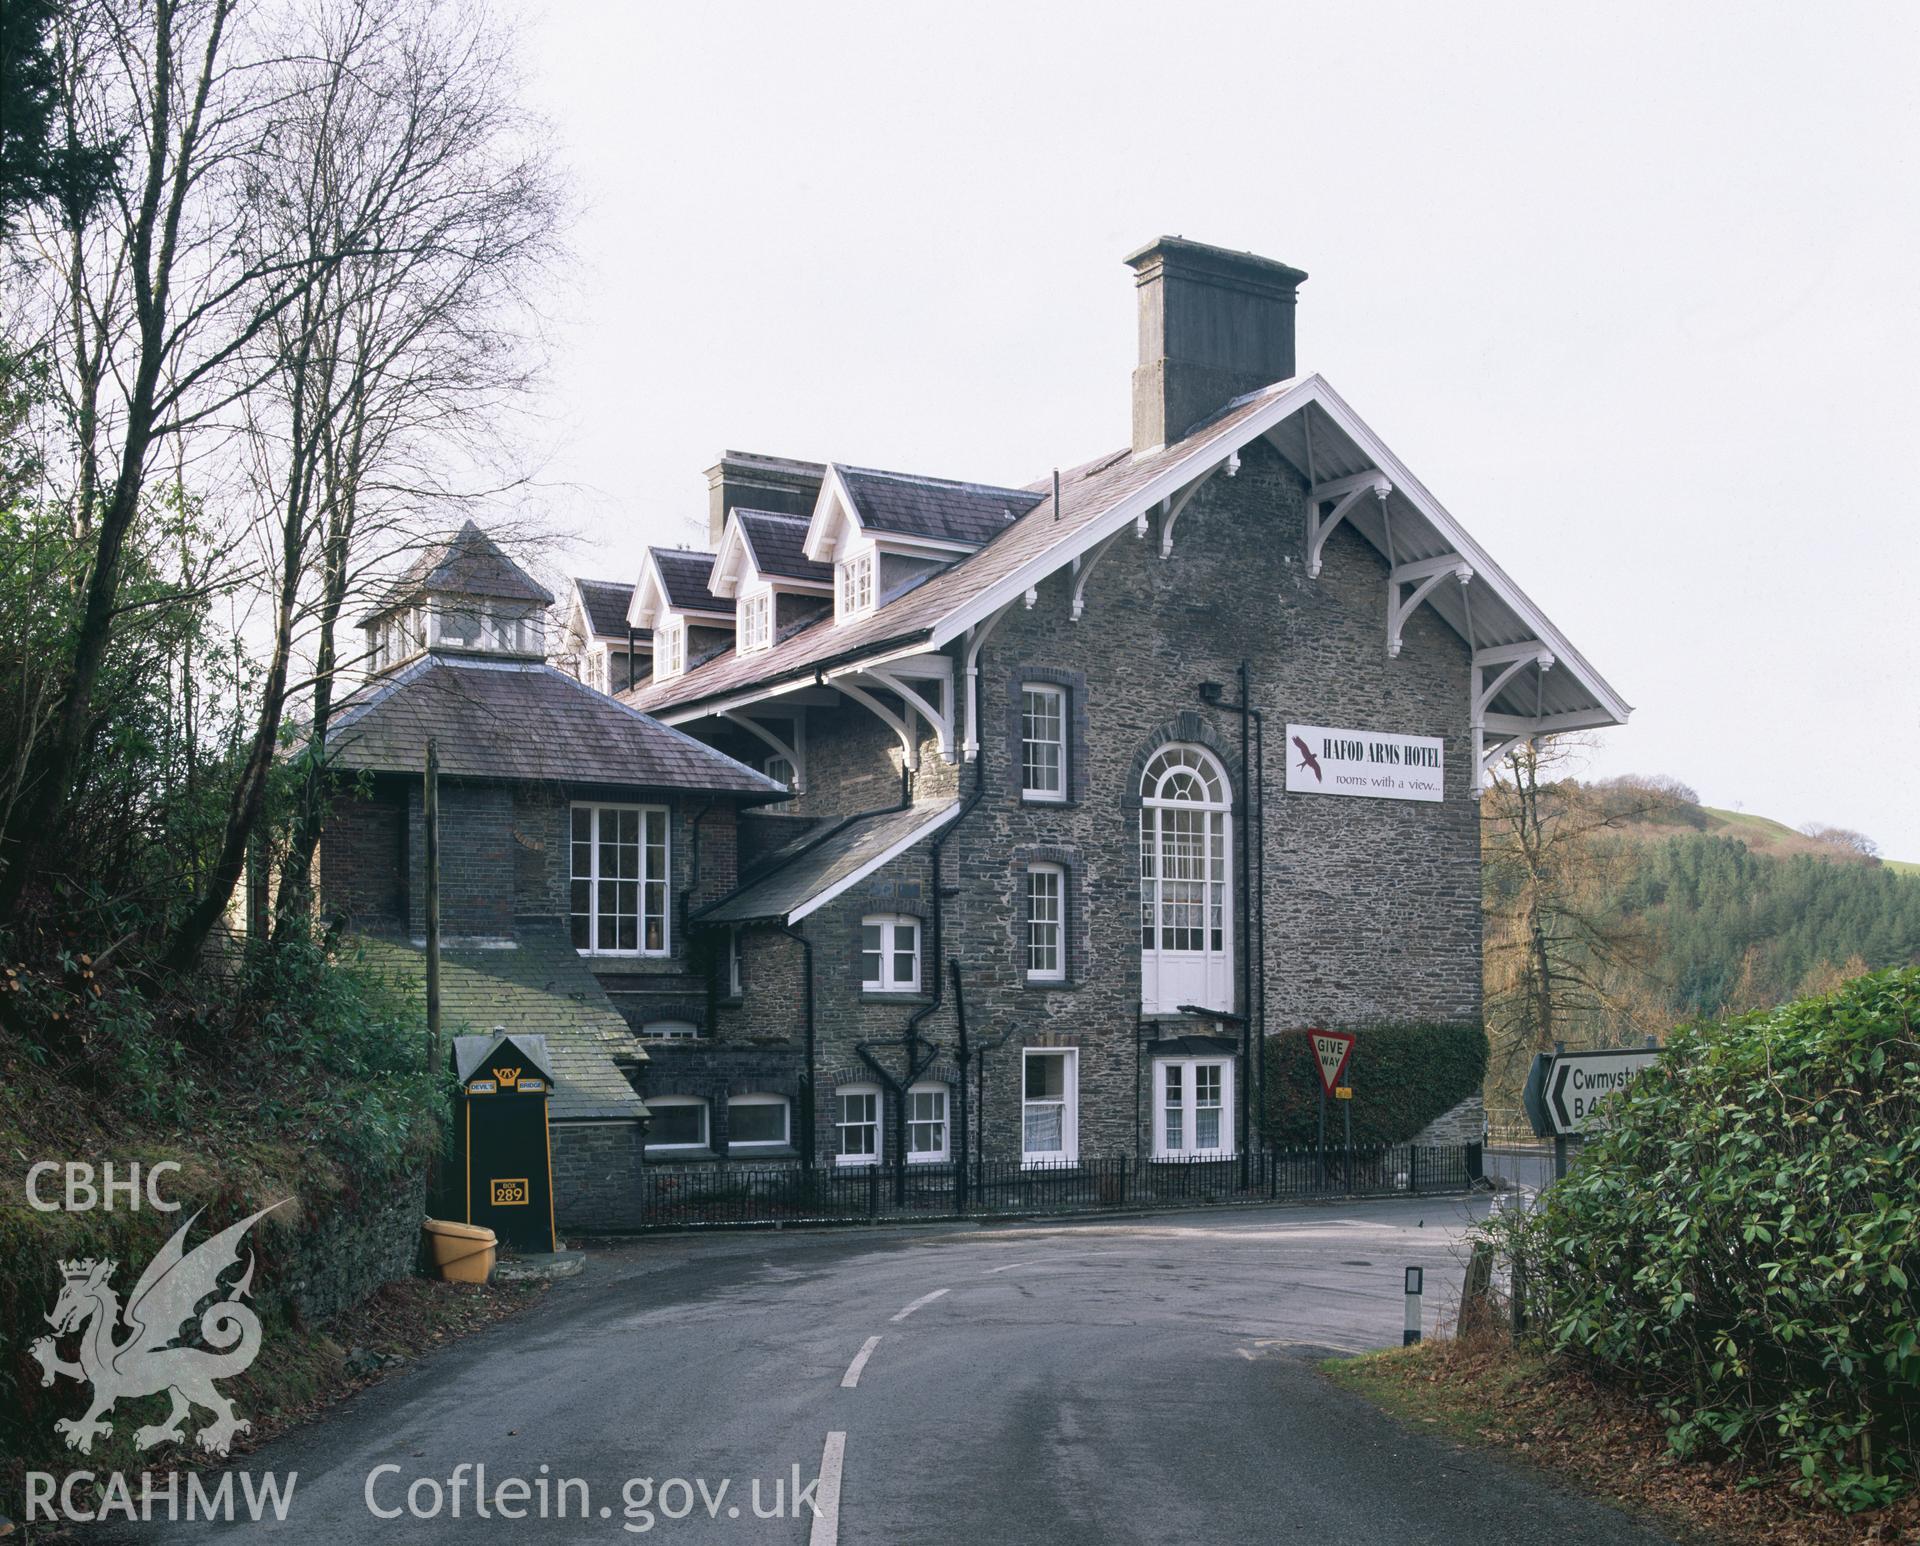 Colour transparency showing Hafod Arms, Pontarfynach, produced by Iain Wright, June 2004